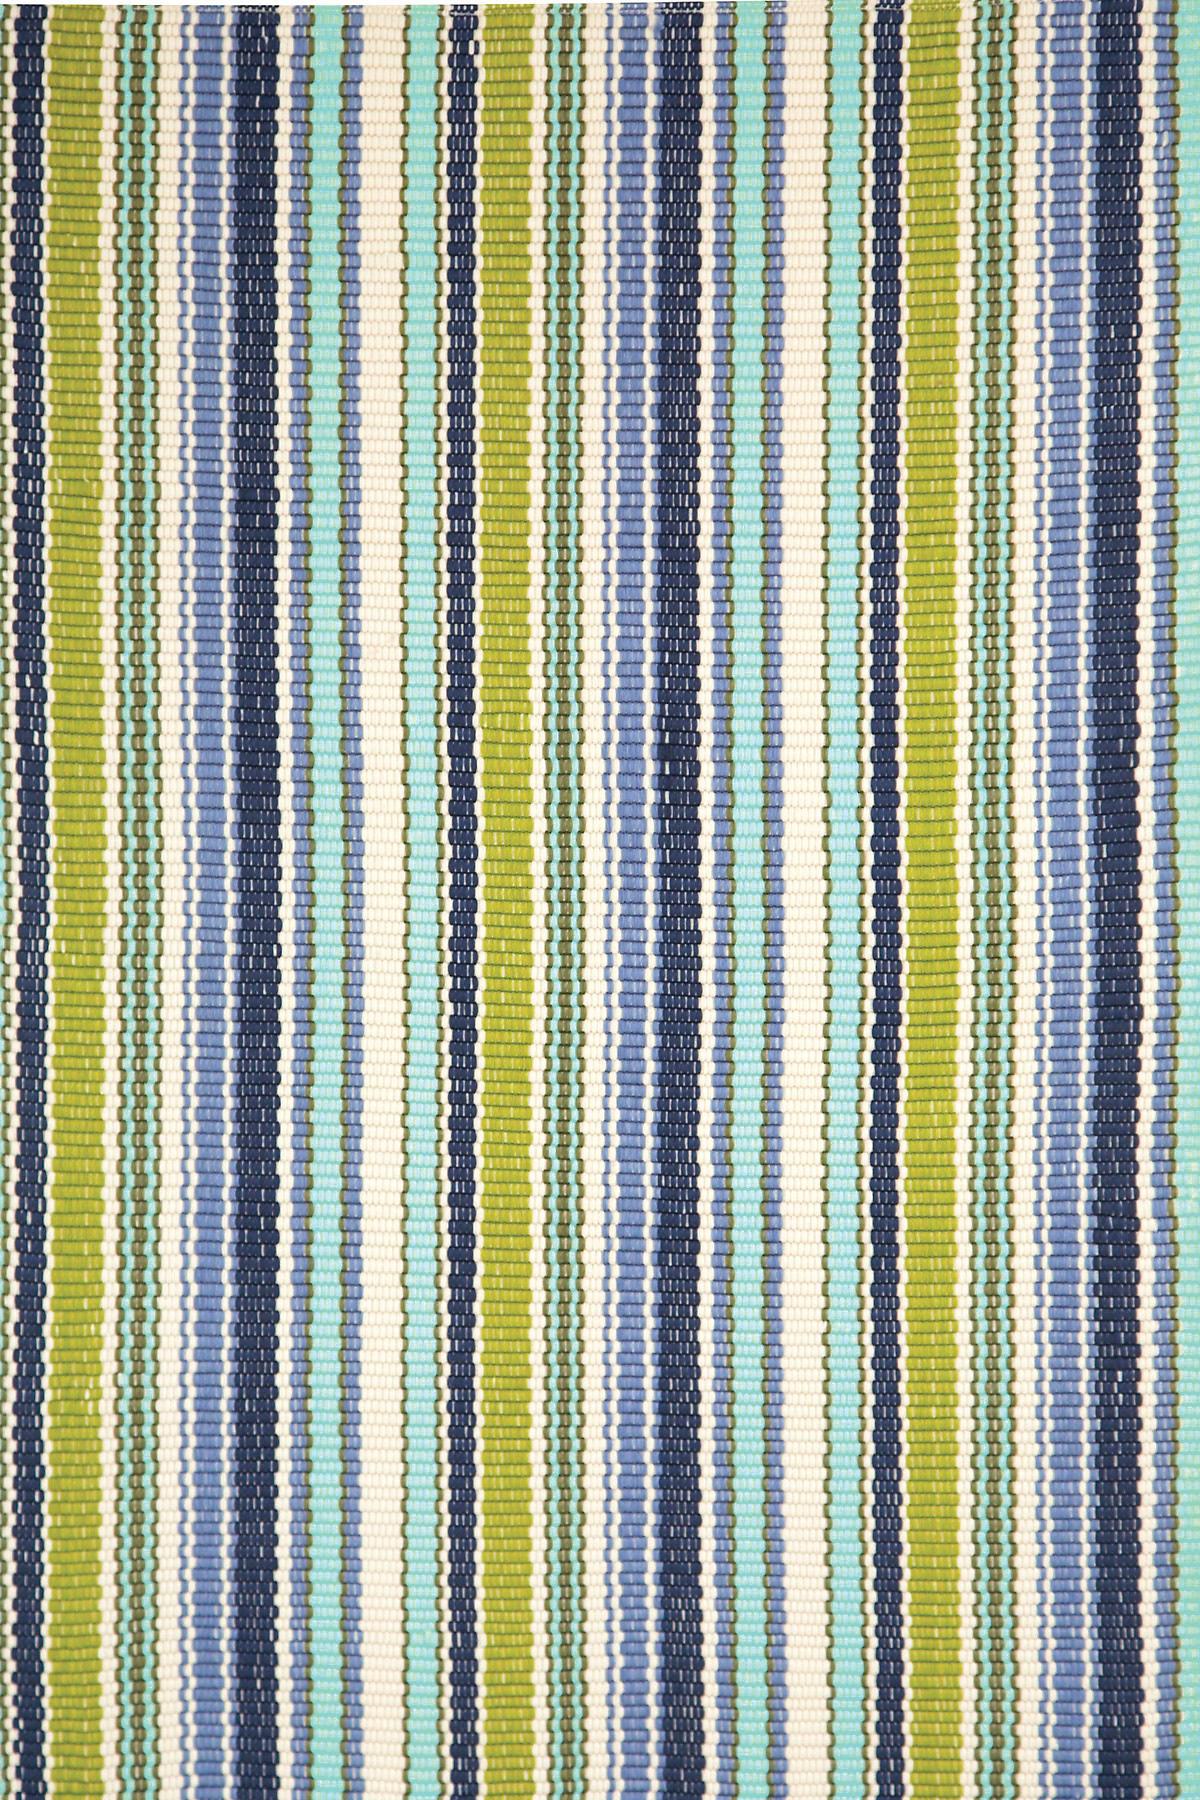 Pond Stripe Indoor Outdoor Rug Dash, Blue And Green Striped Outdoor Rug